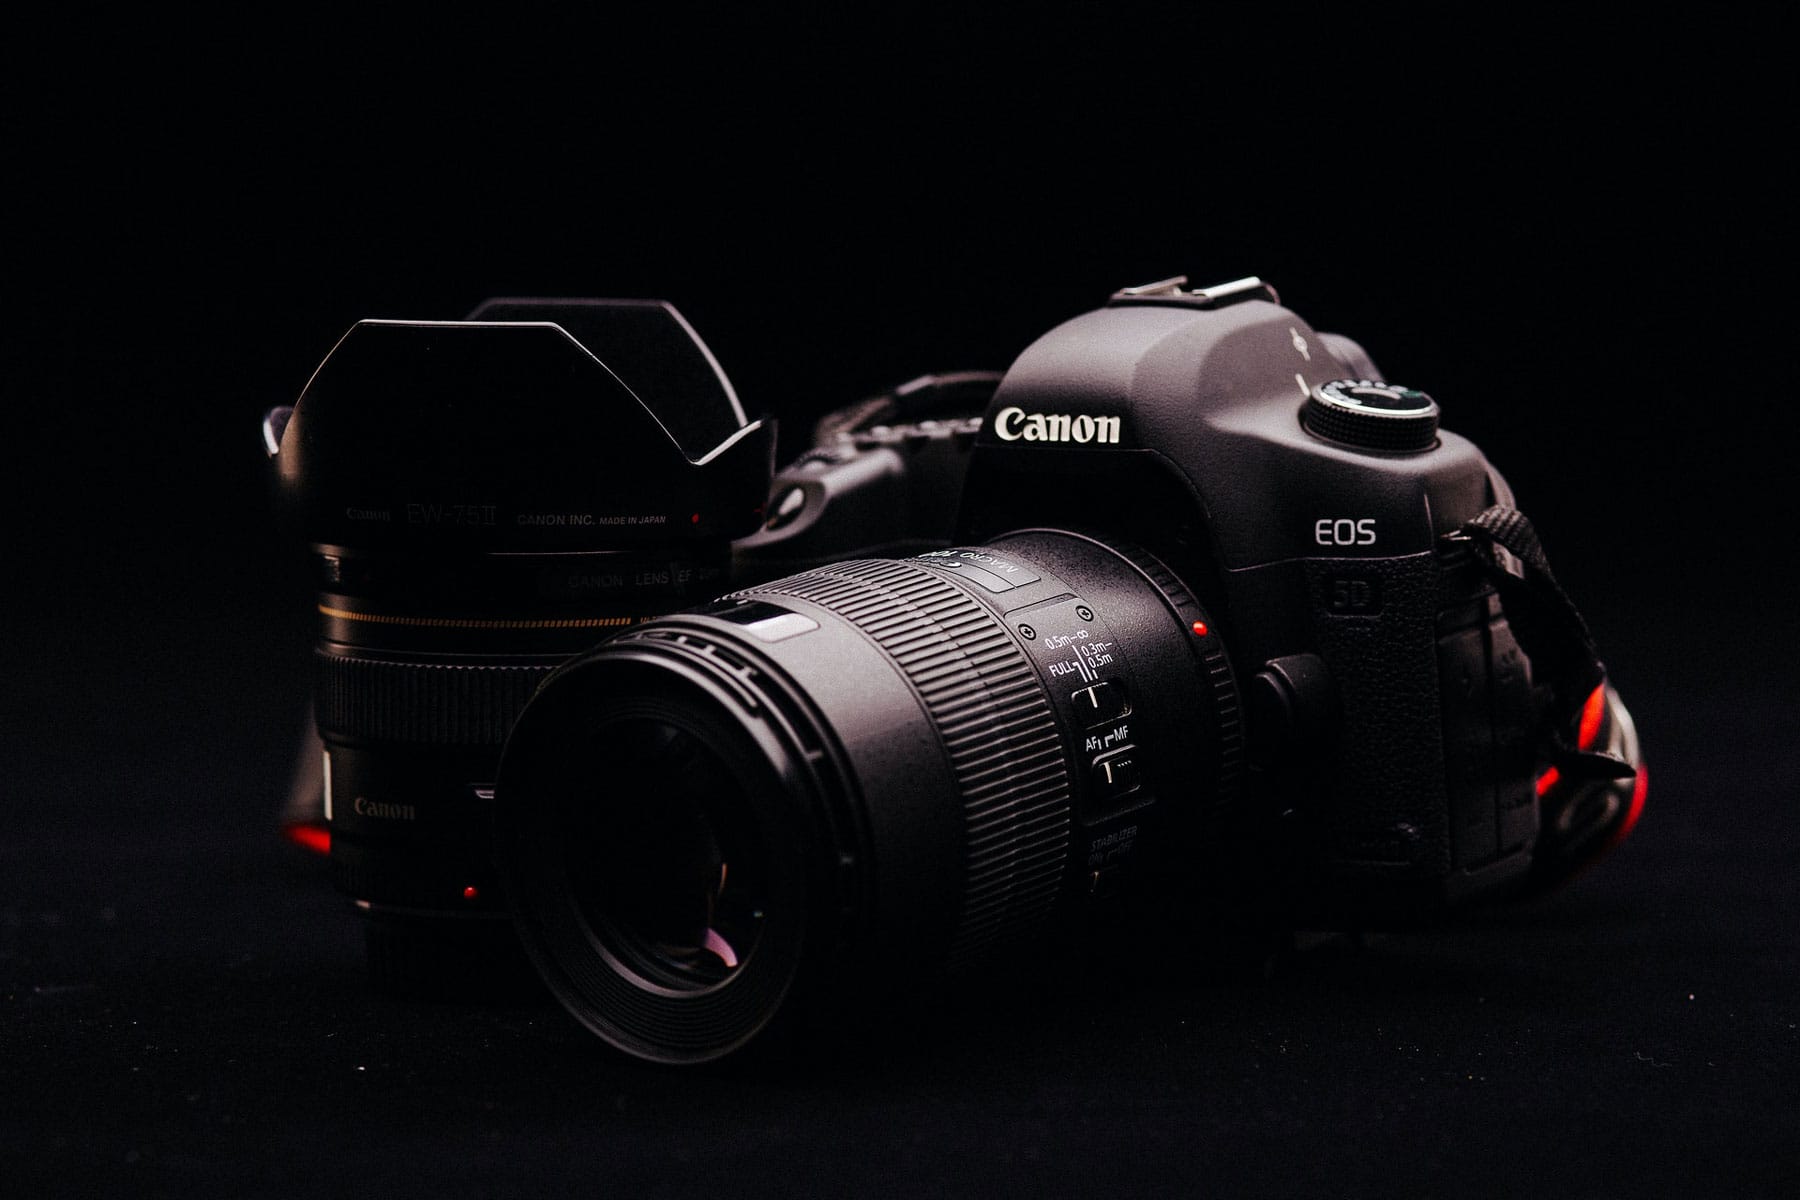 Image of a black Canon camera and lenses against a black backdrop